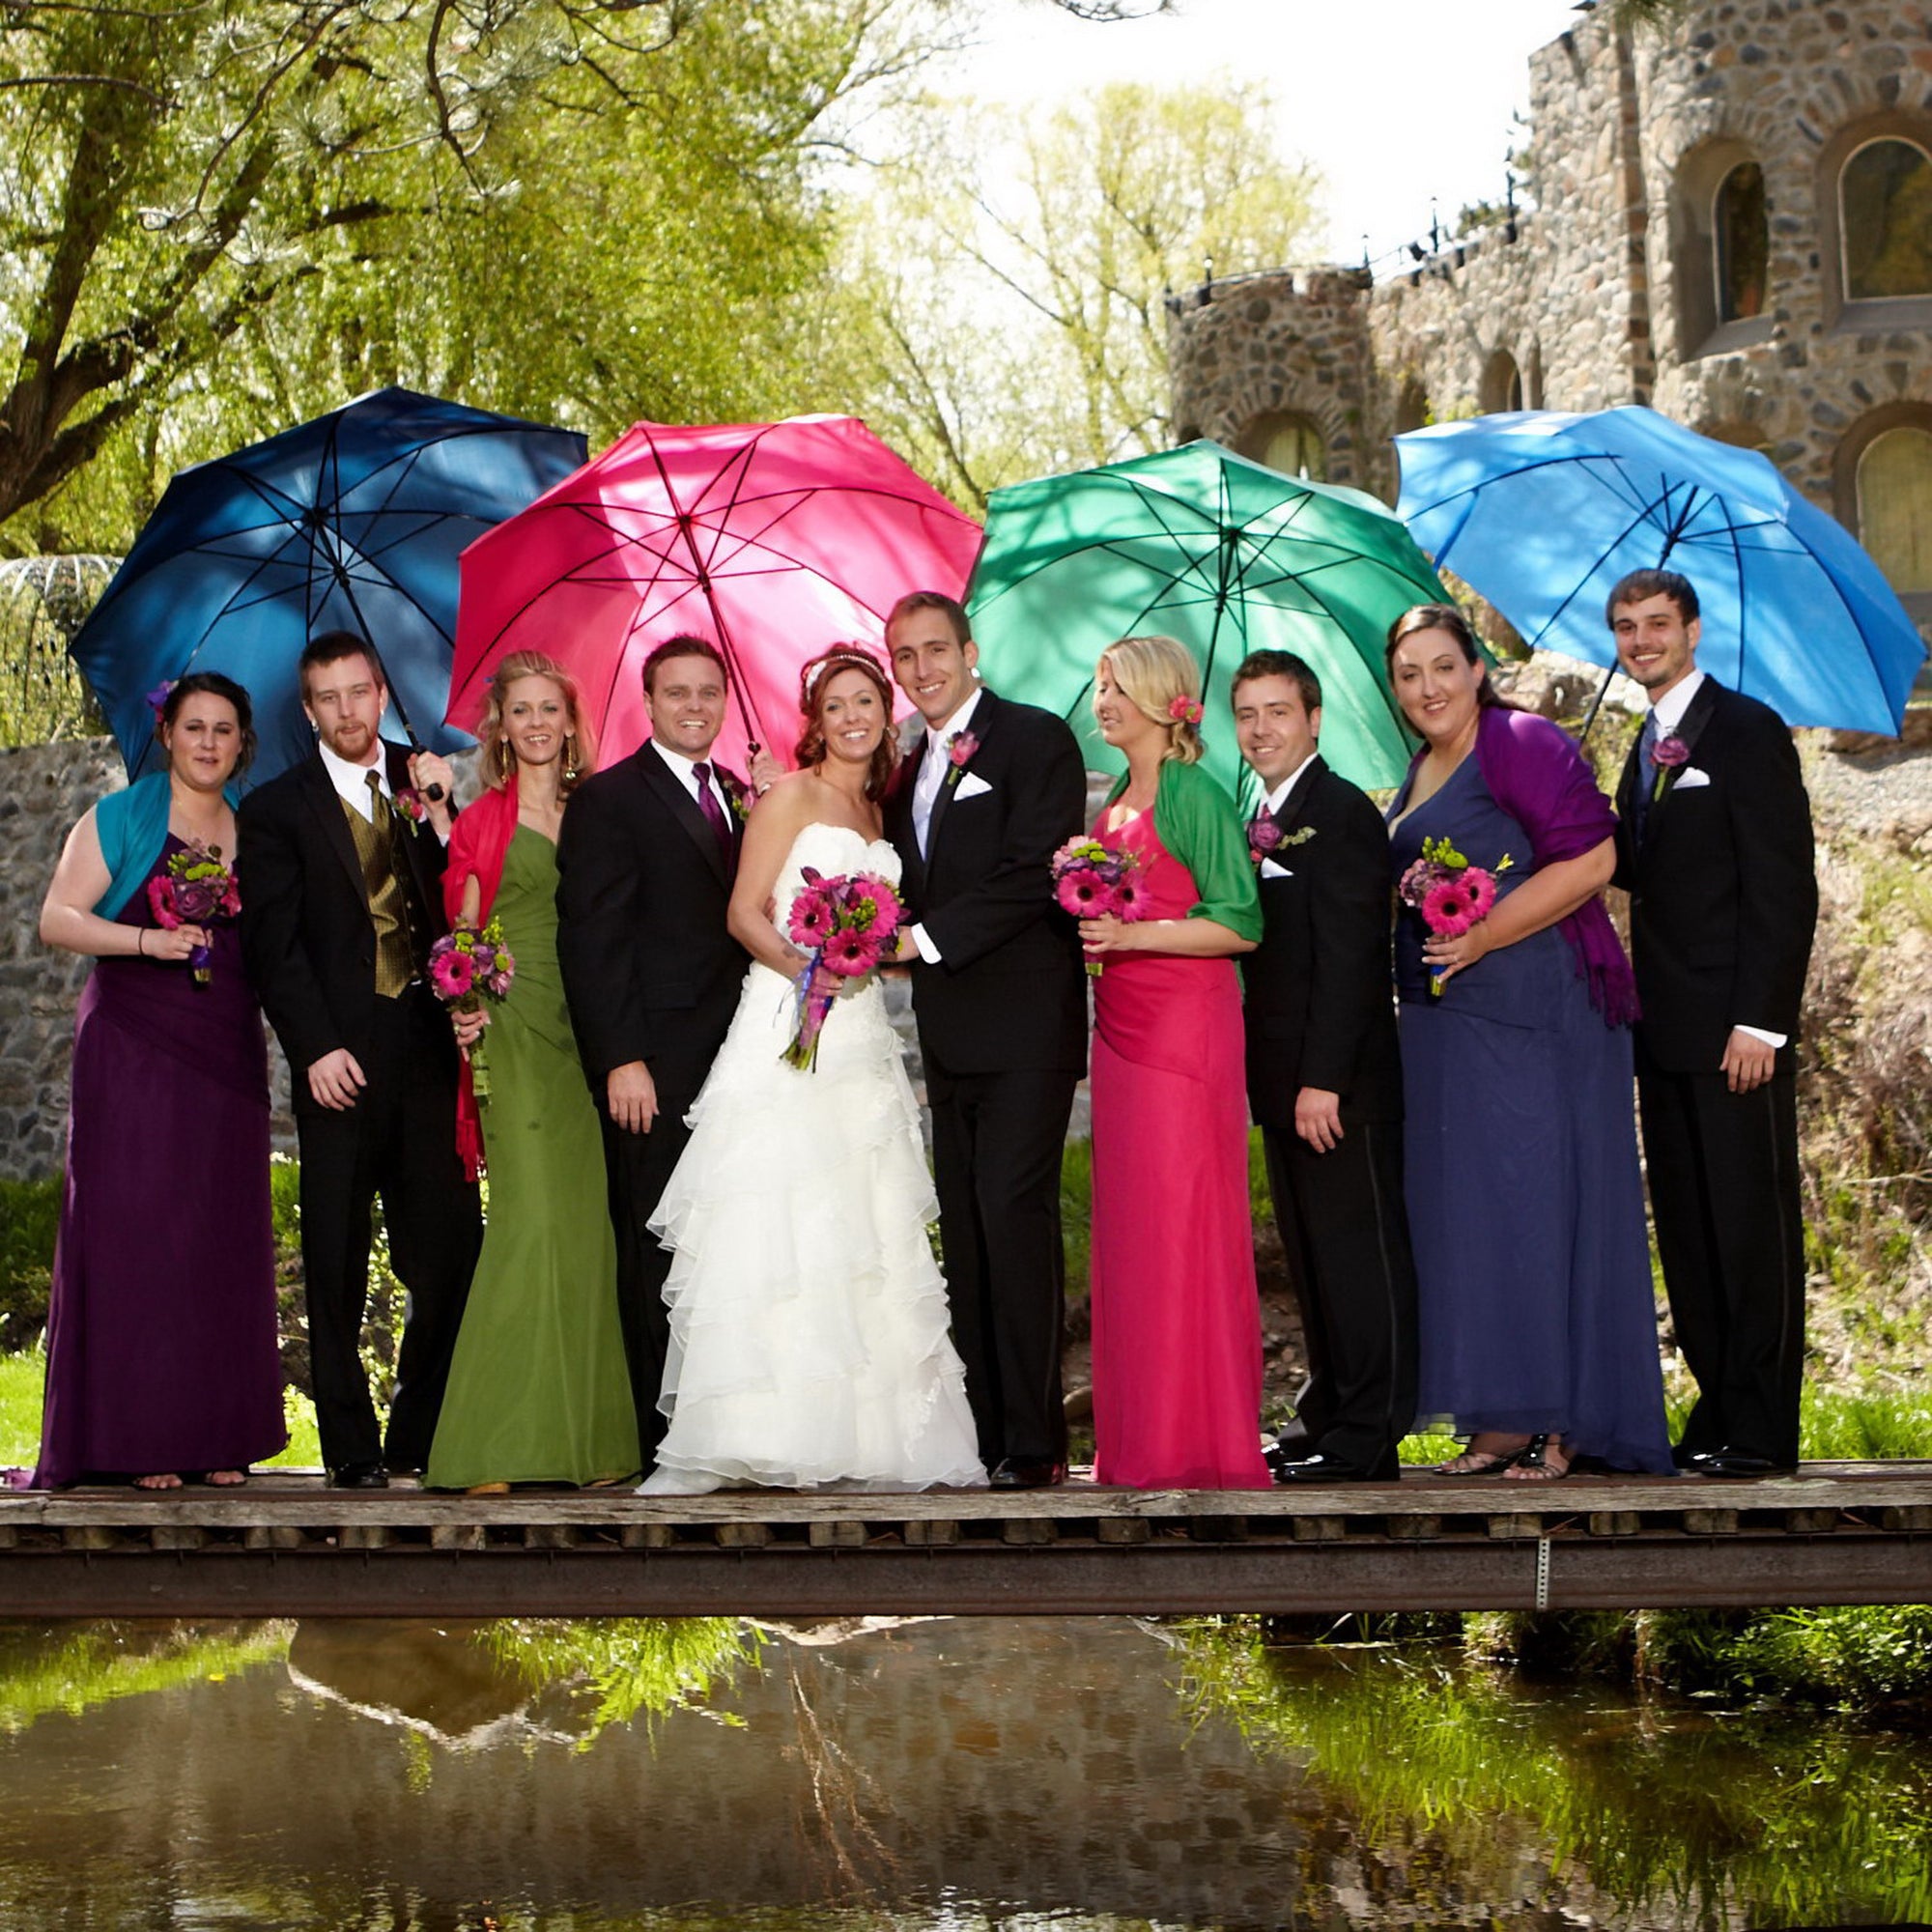 Bride and groom surrounded by couples each with an umbrella.